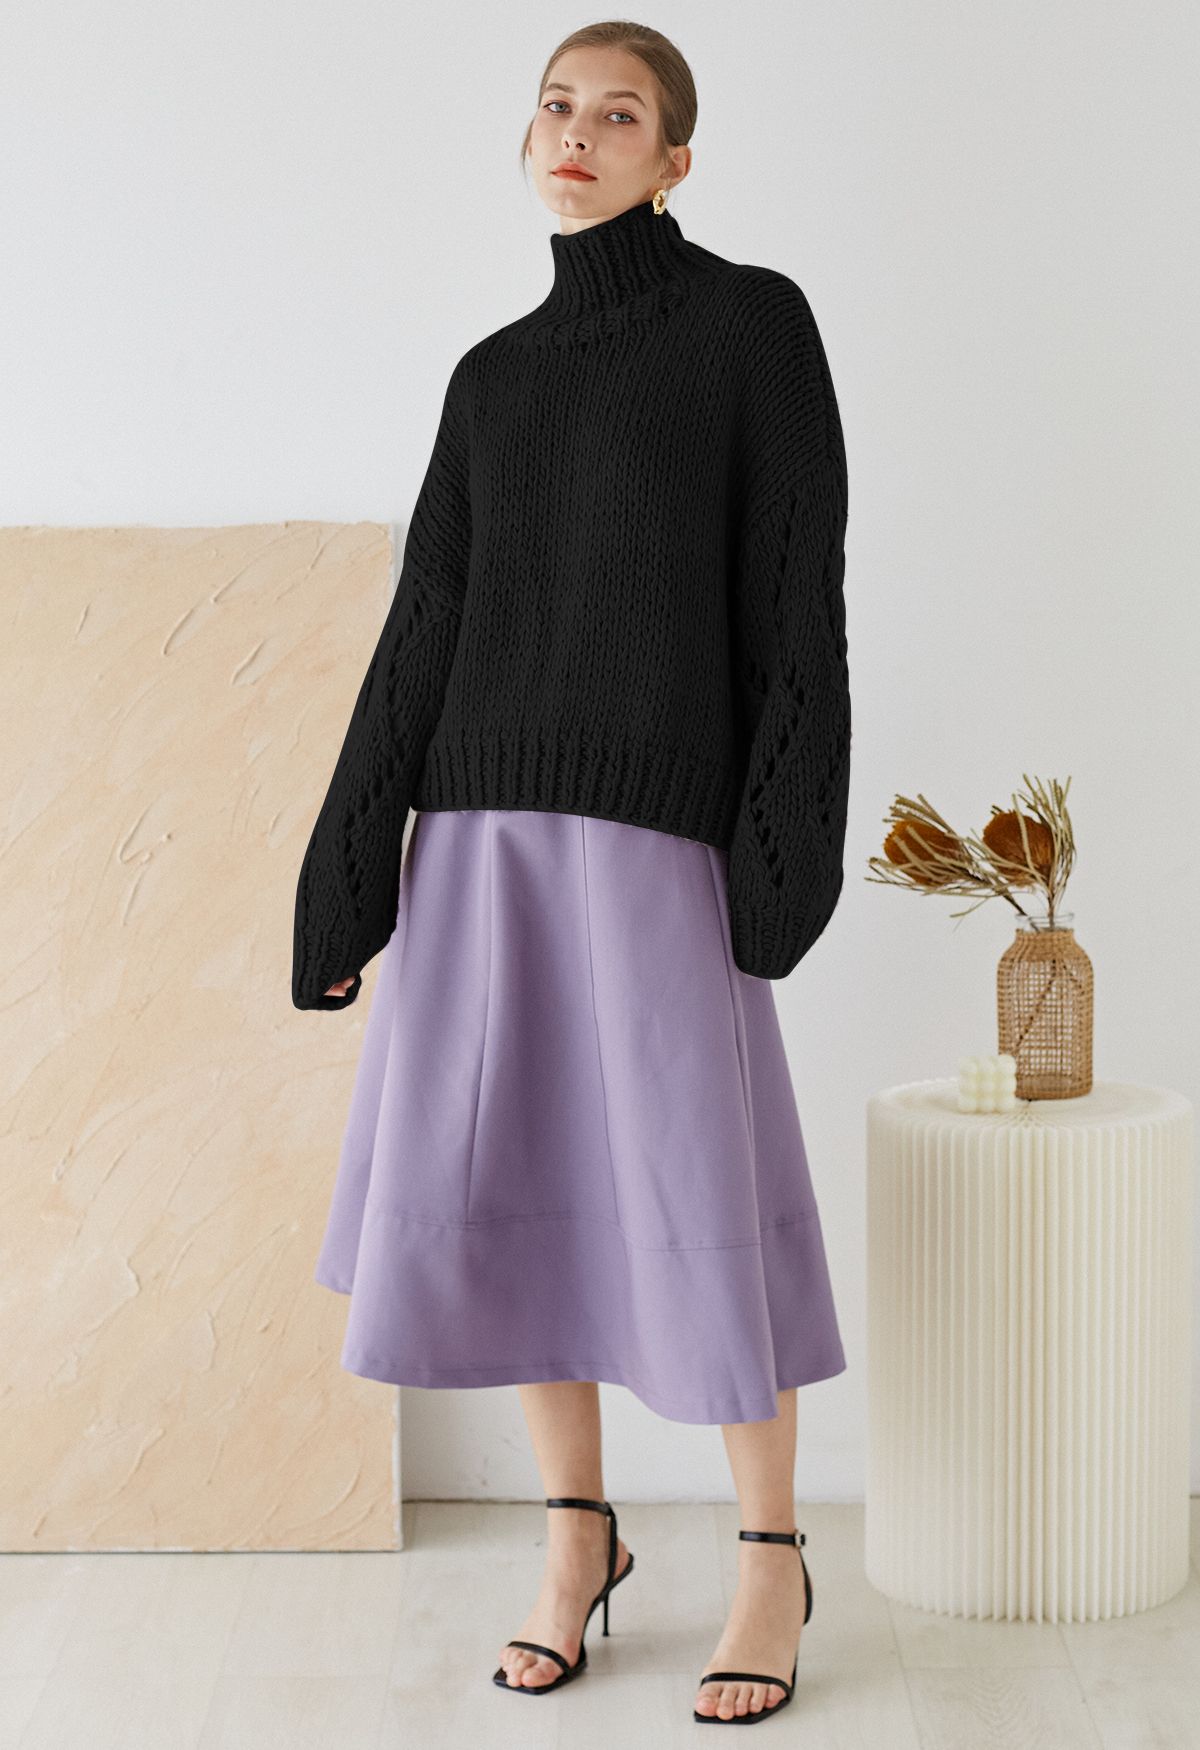 Pointelle Sleeve High Neck Hand-Knit Sweater in Black